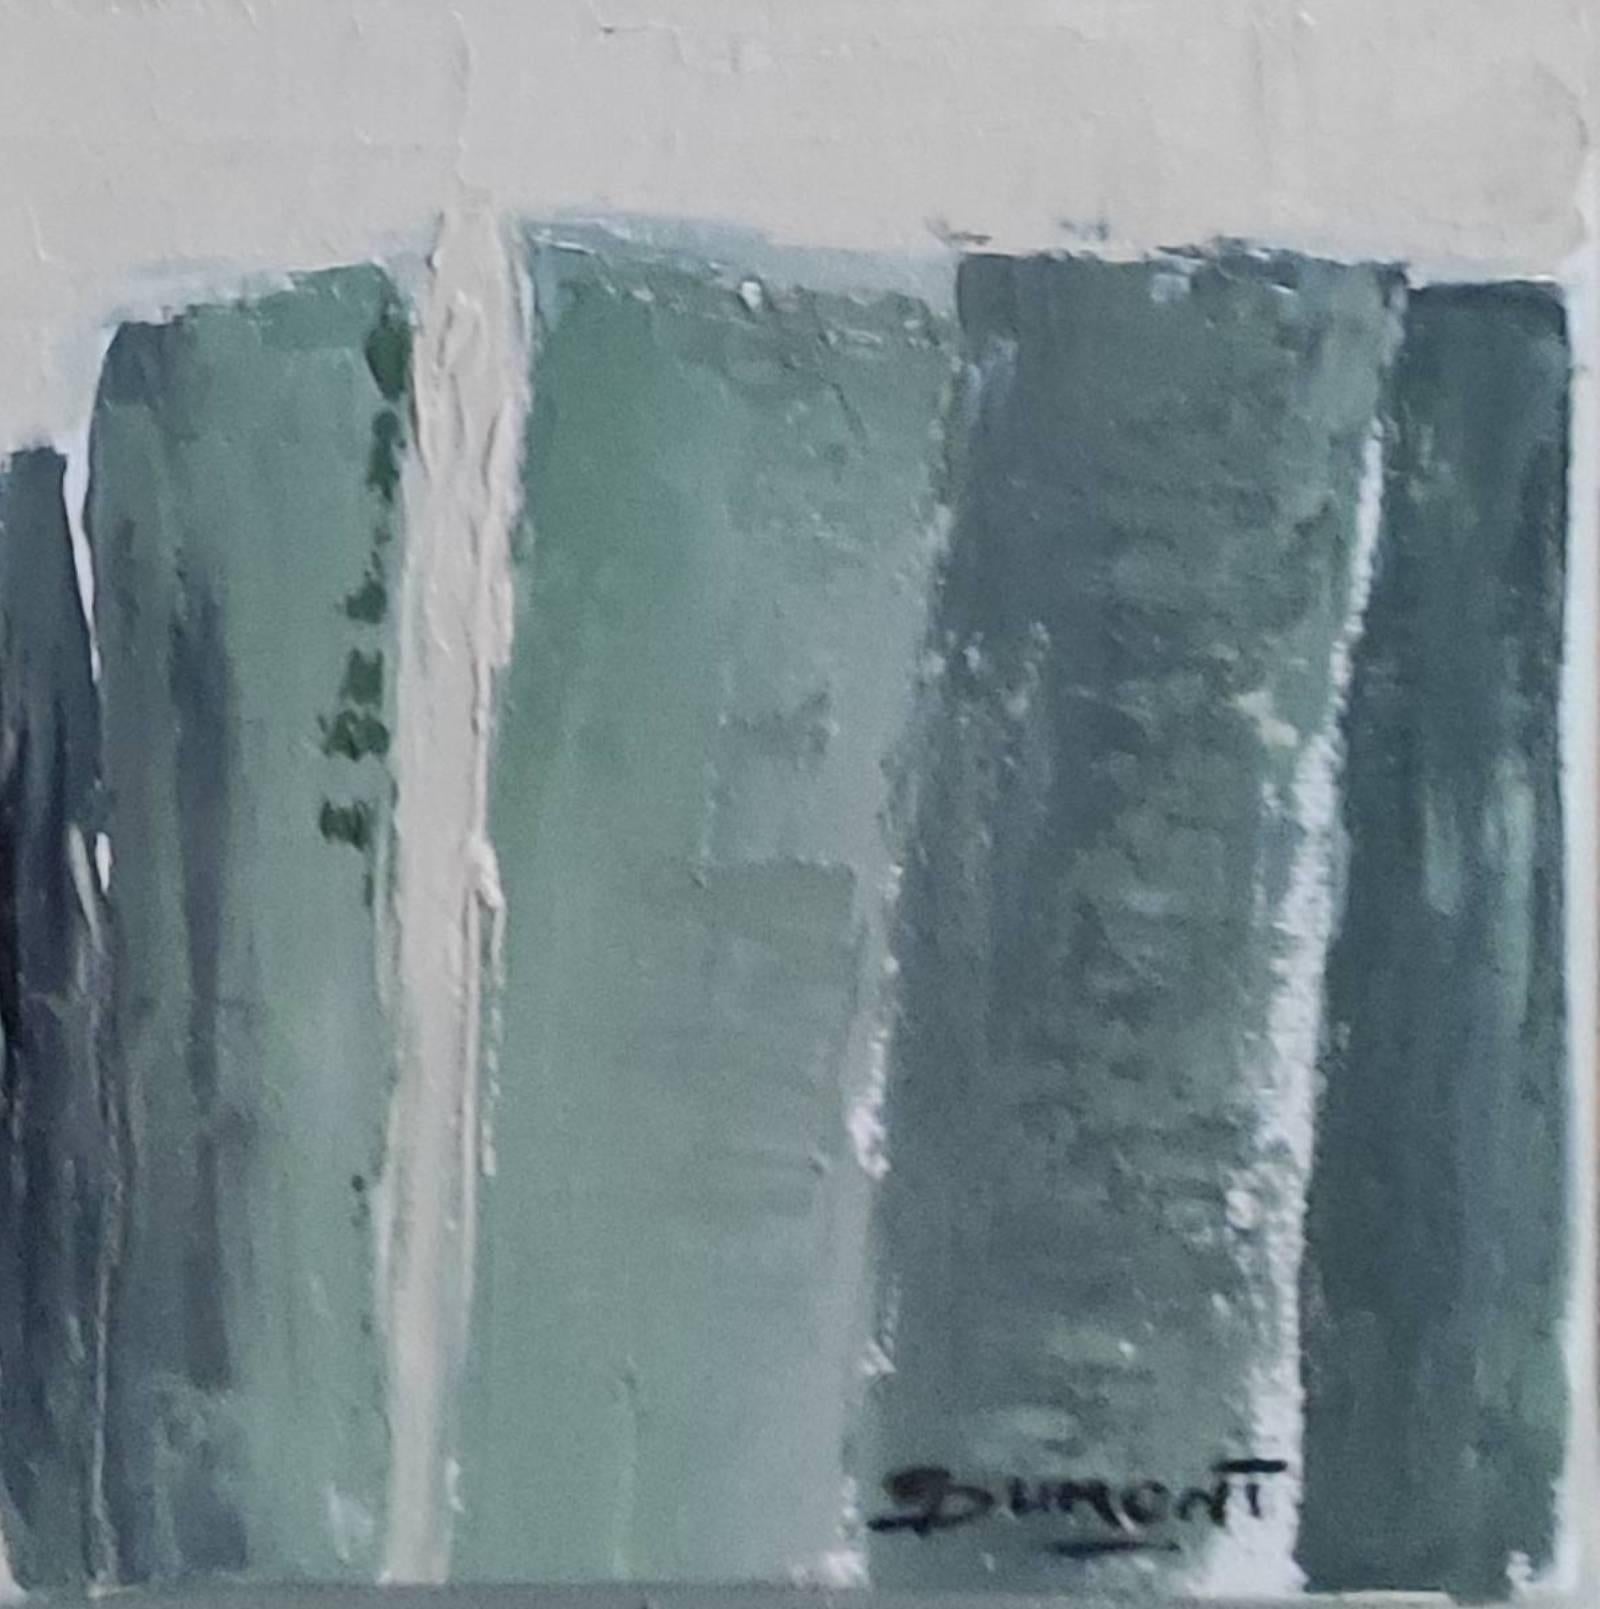 green library, abstract, contempory, oil on canvas, books, minimalism, modern - Abstract Painting by SOPHIE DUMONT